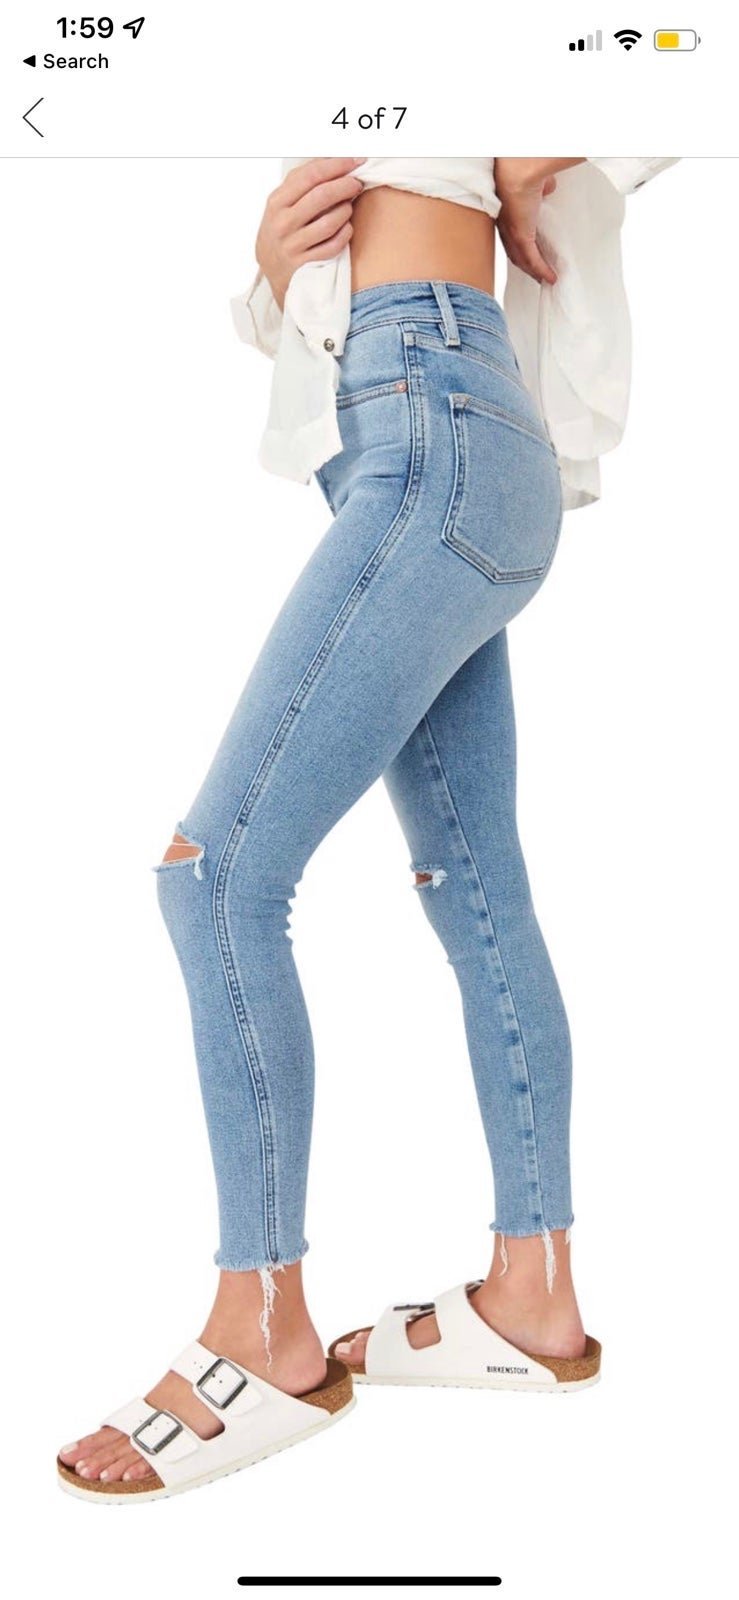 save up to 70% Free People Jeans kRTDPhqEB Discount